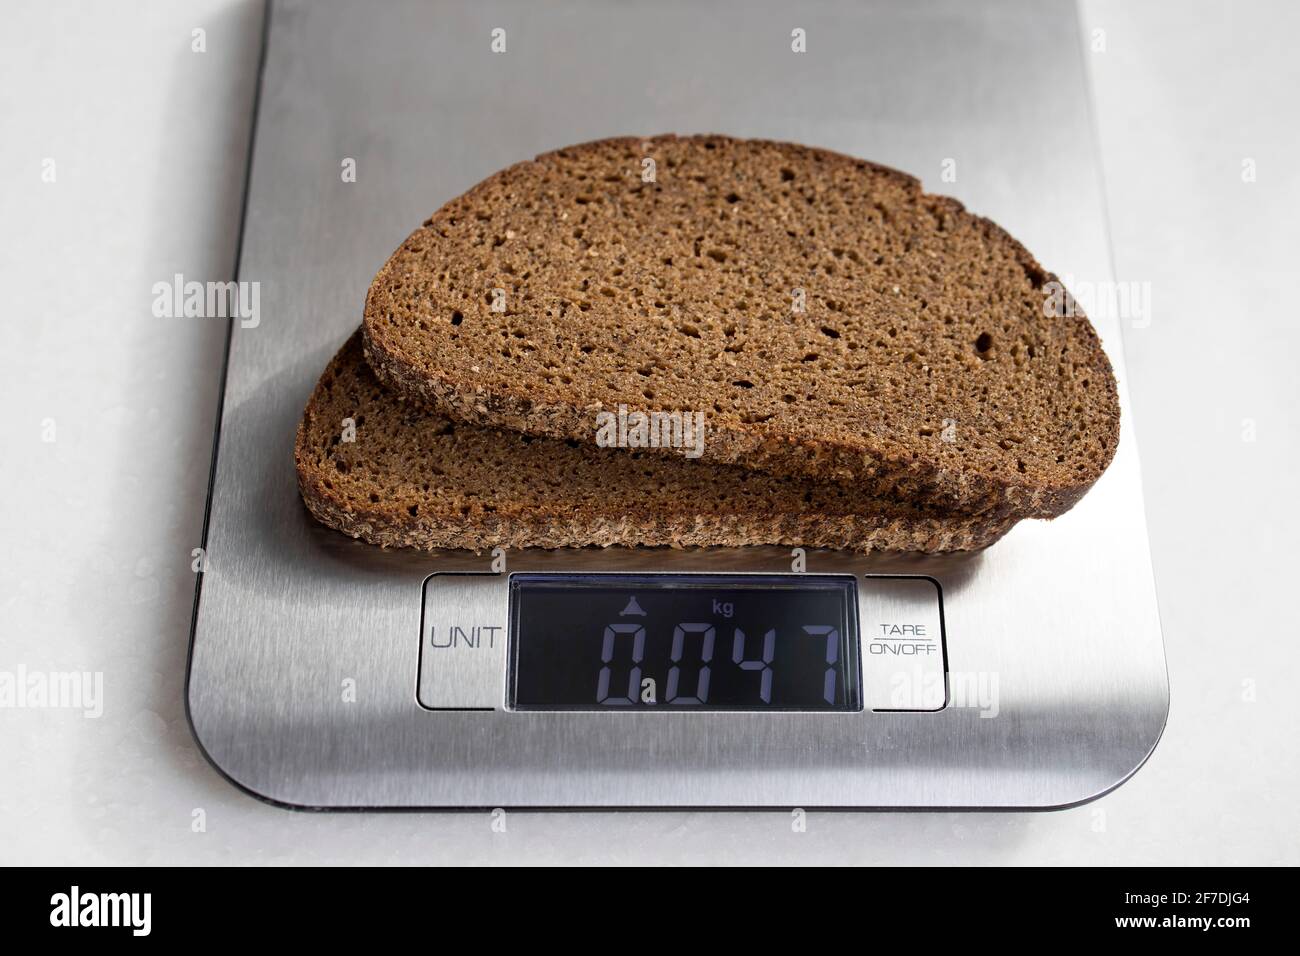 https://c8.alamy.com/comp/2F7DJG4/two-pieces-of-rye-bread-are-weighed-on-a-kitchen-scale-diet-2F7DJG4.jpg